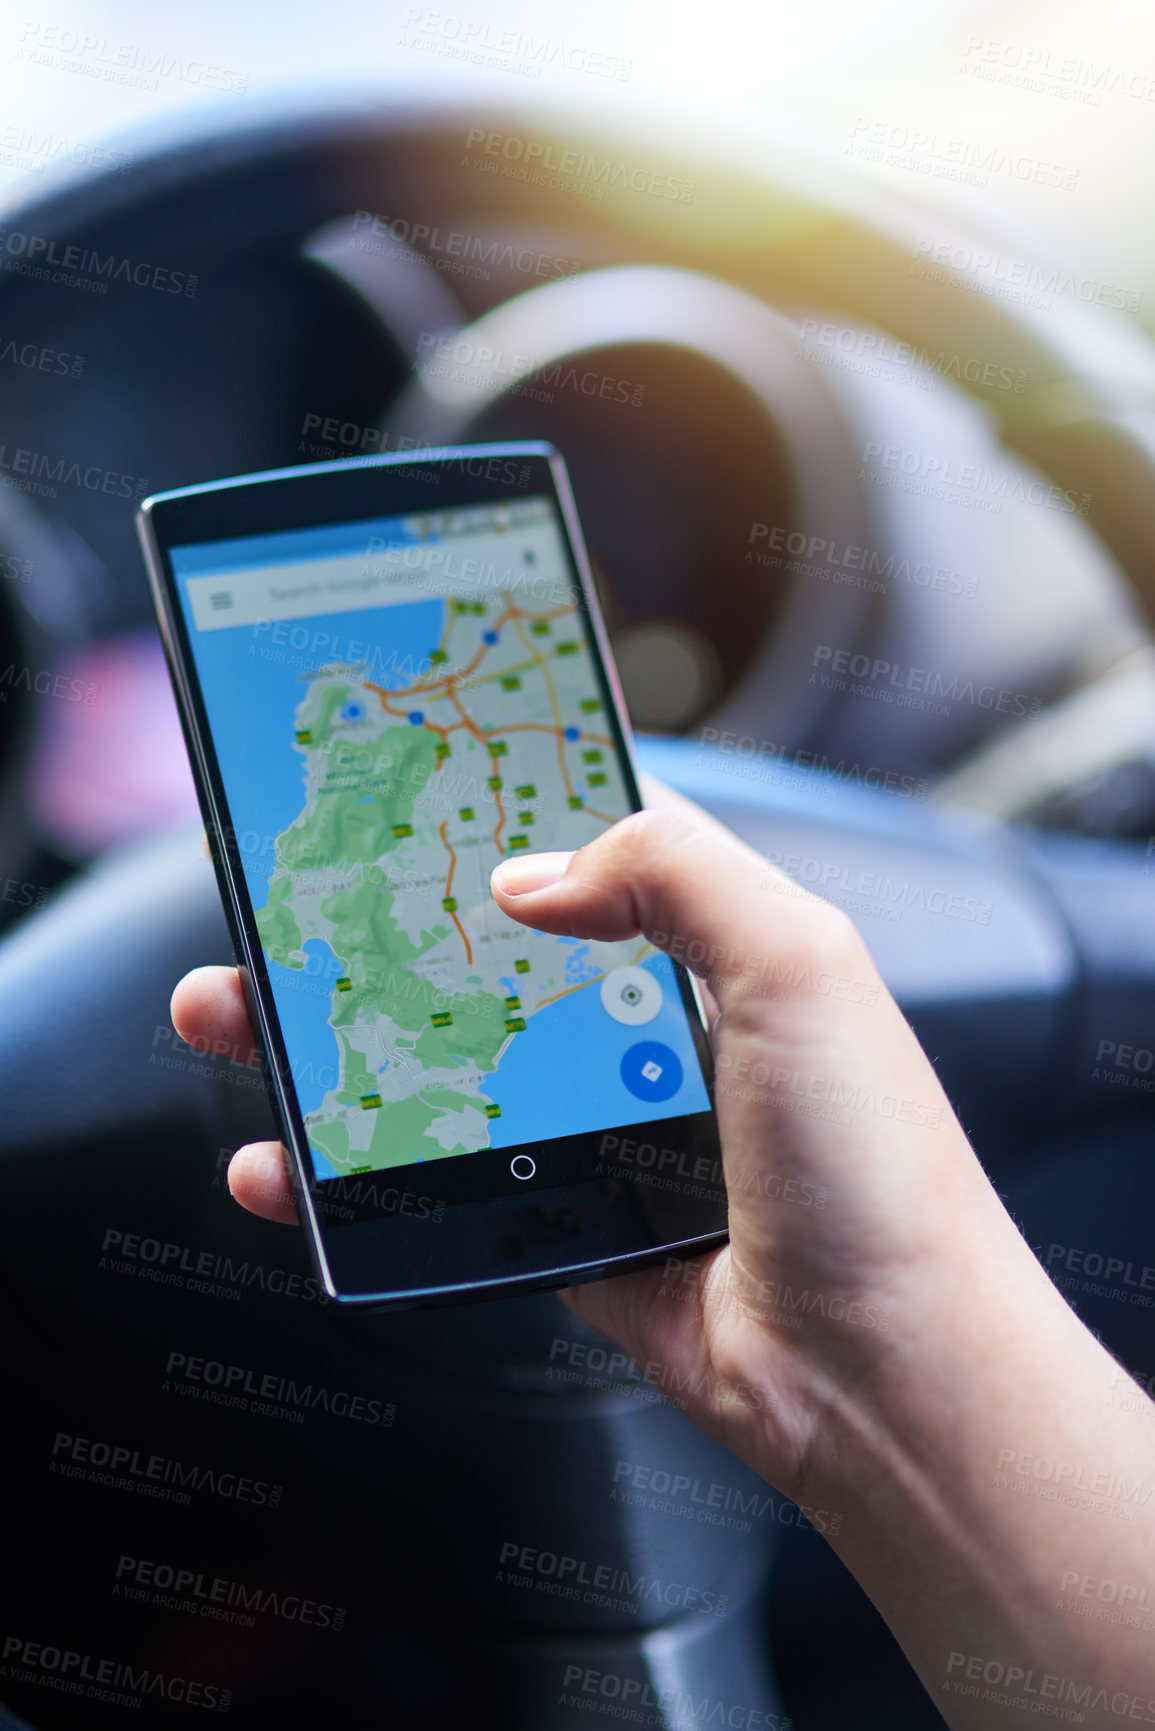 Buy stock photo Shot of a person in a car using their phone to find directions